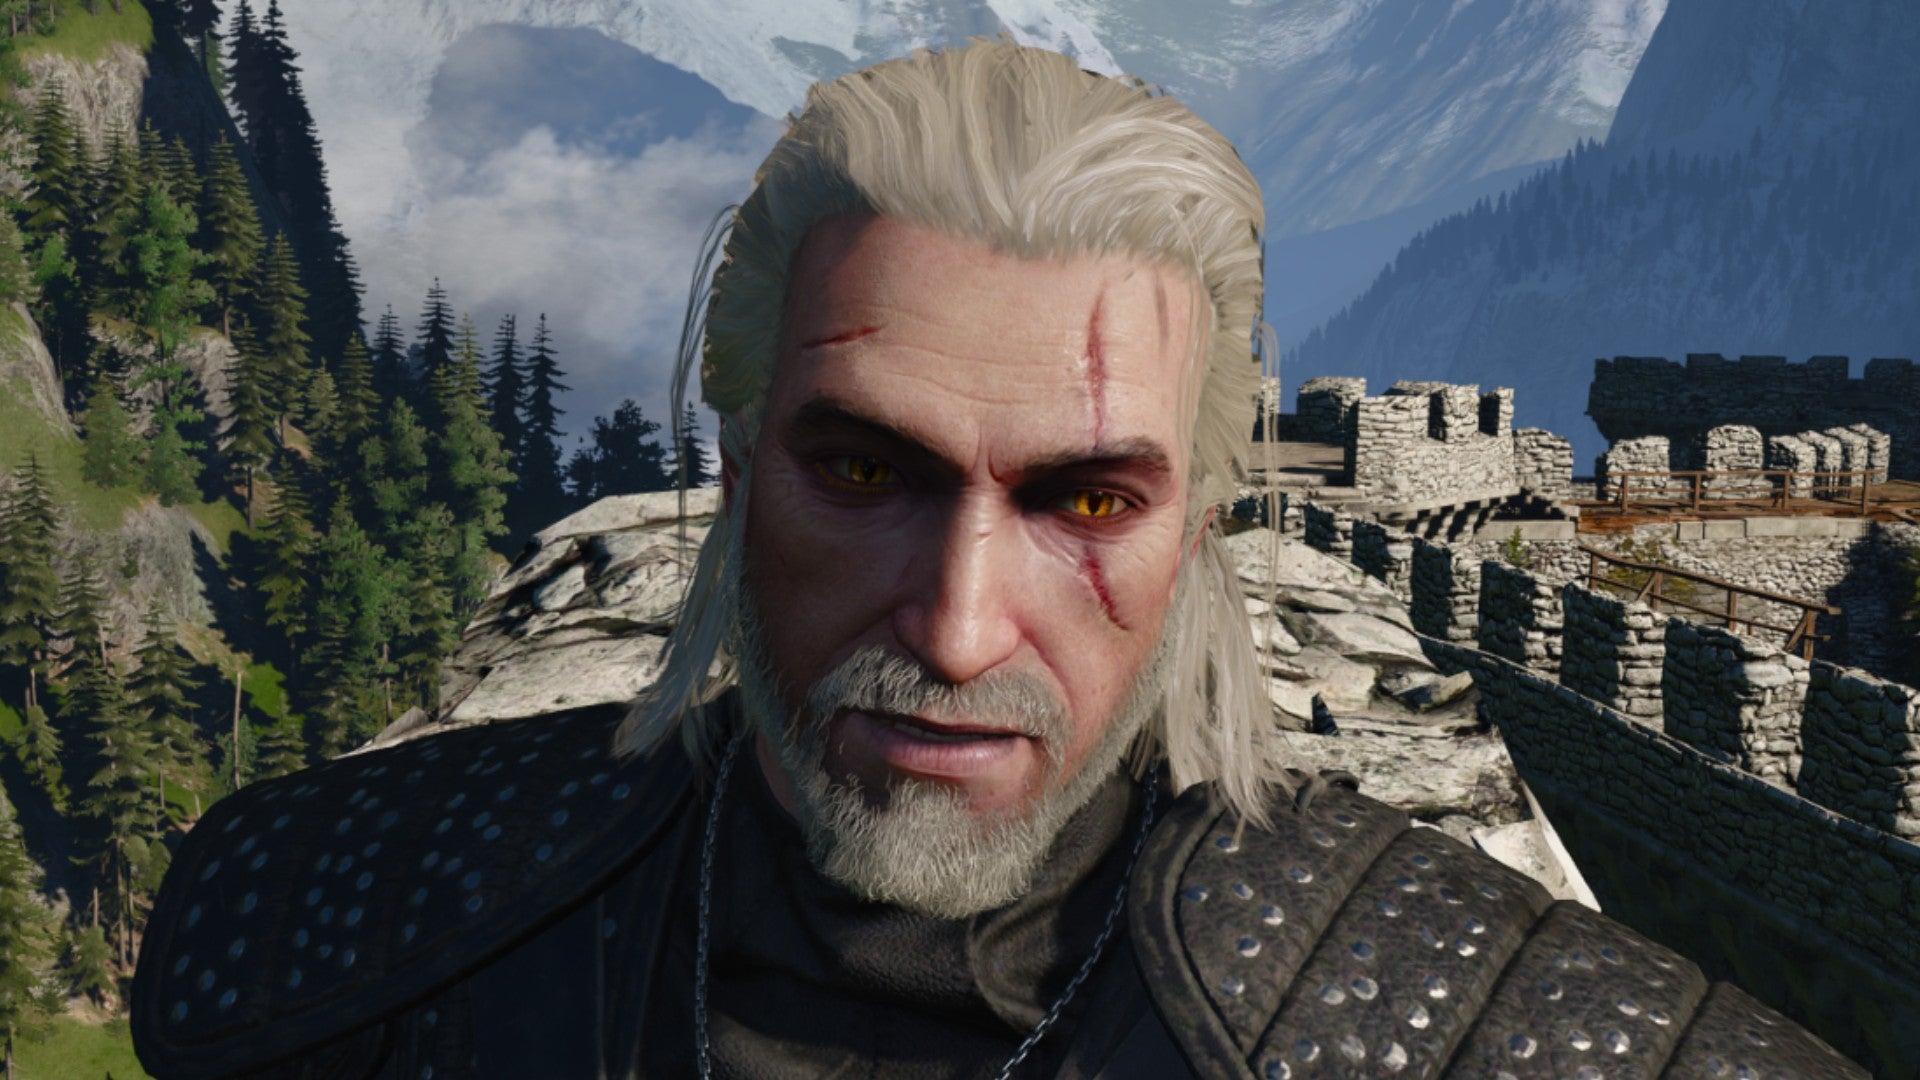 Witcher 3 screenshot showing Geralt's default hair cut from the front.